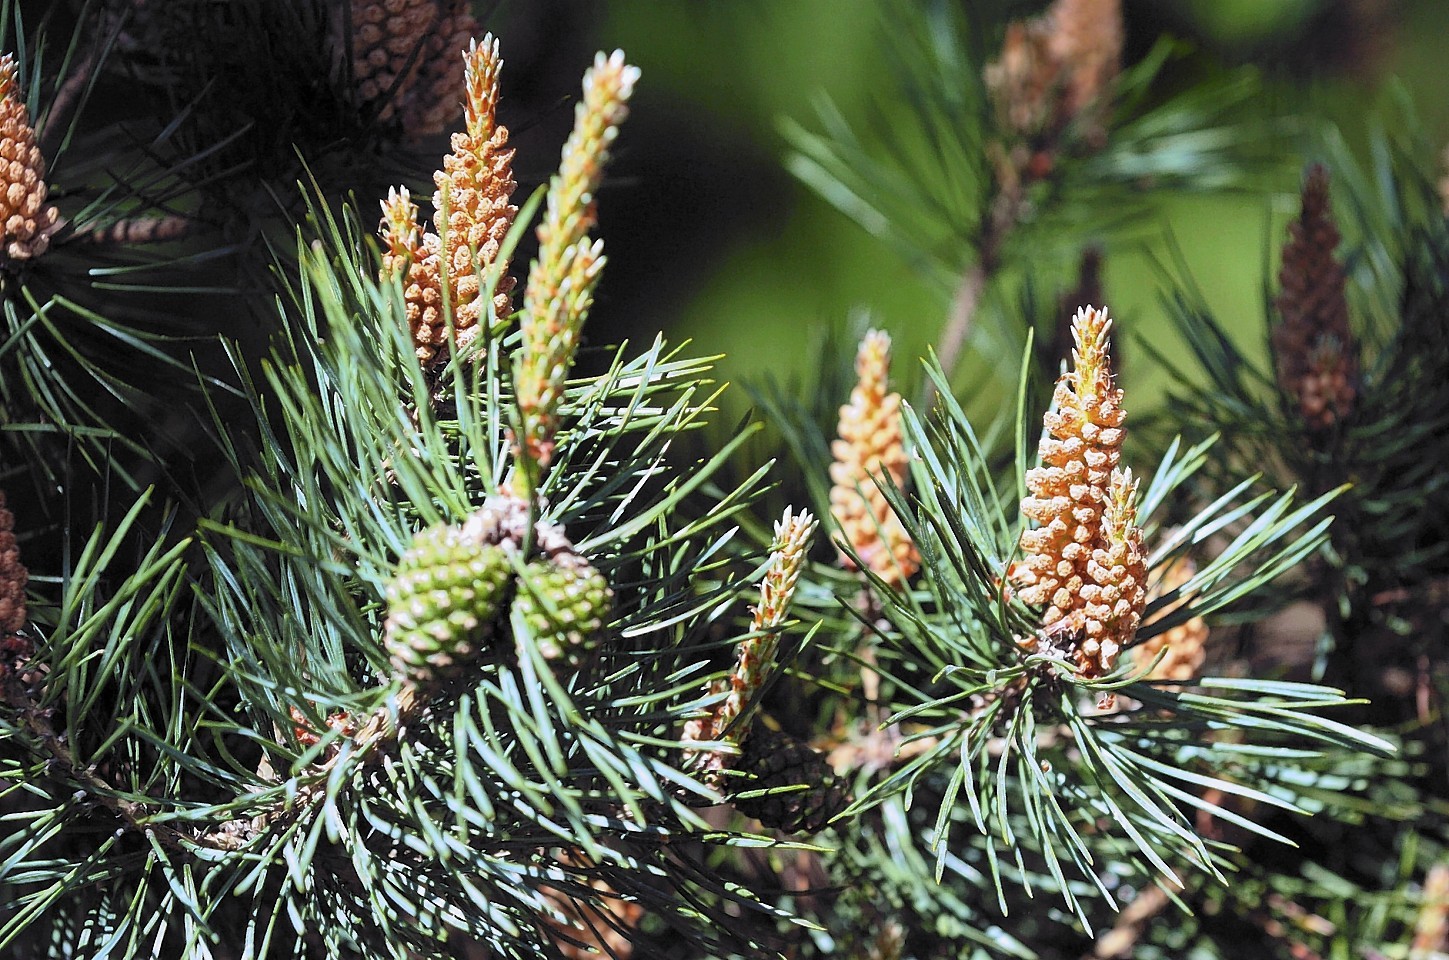 Scots researchers are leading a project to protect Scots Pine from new pests and diseases